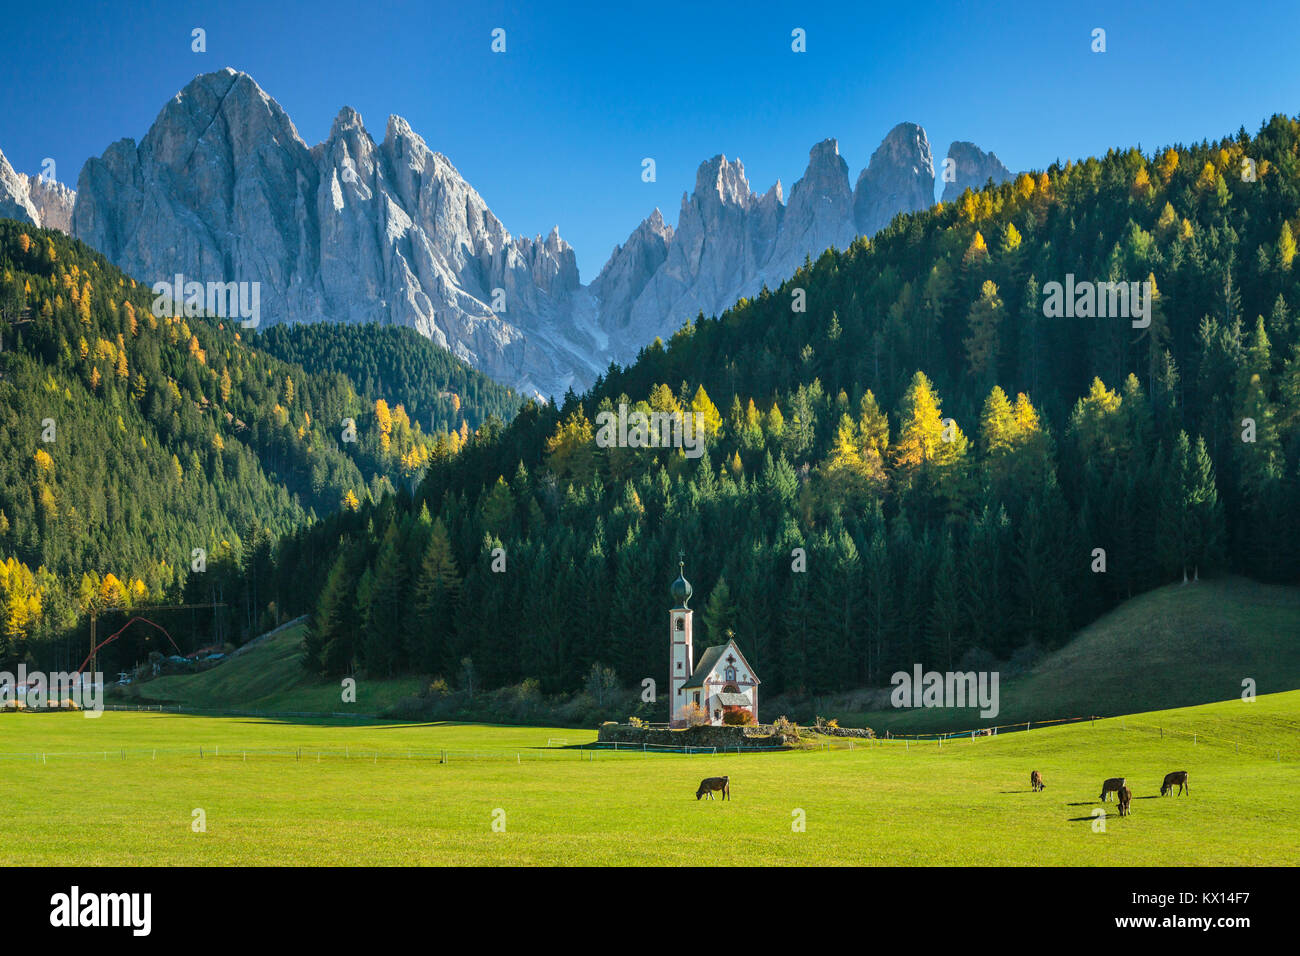 The Val di Funes Valley and San Giovanni church with views of the Dolomites, South Tyrol, Italy, Europe. Stock Photo